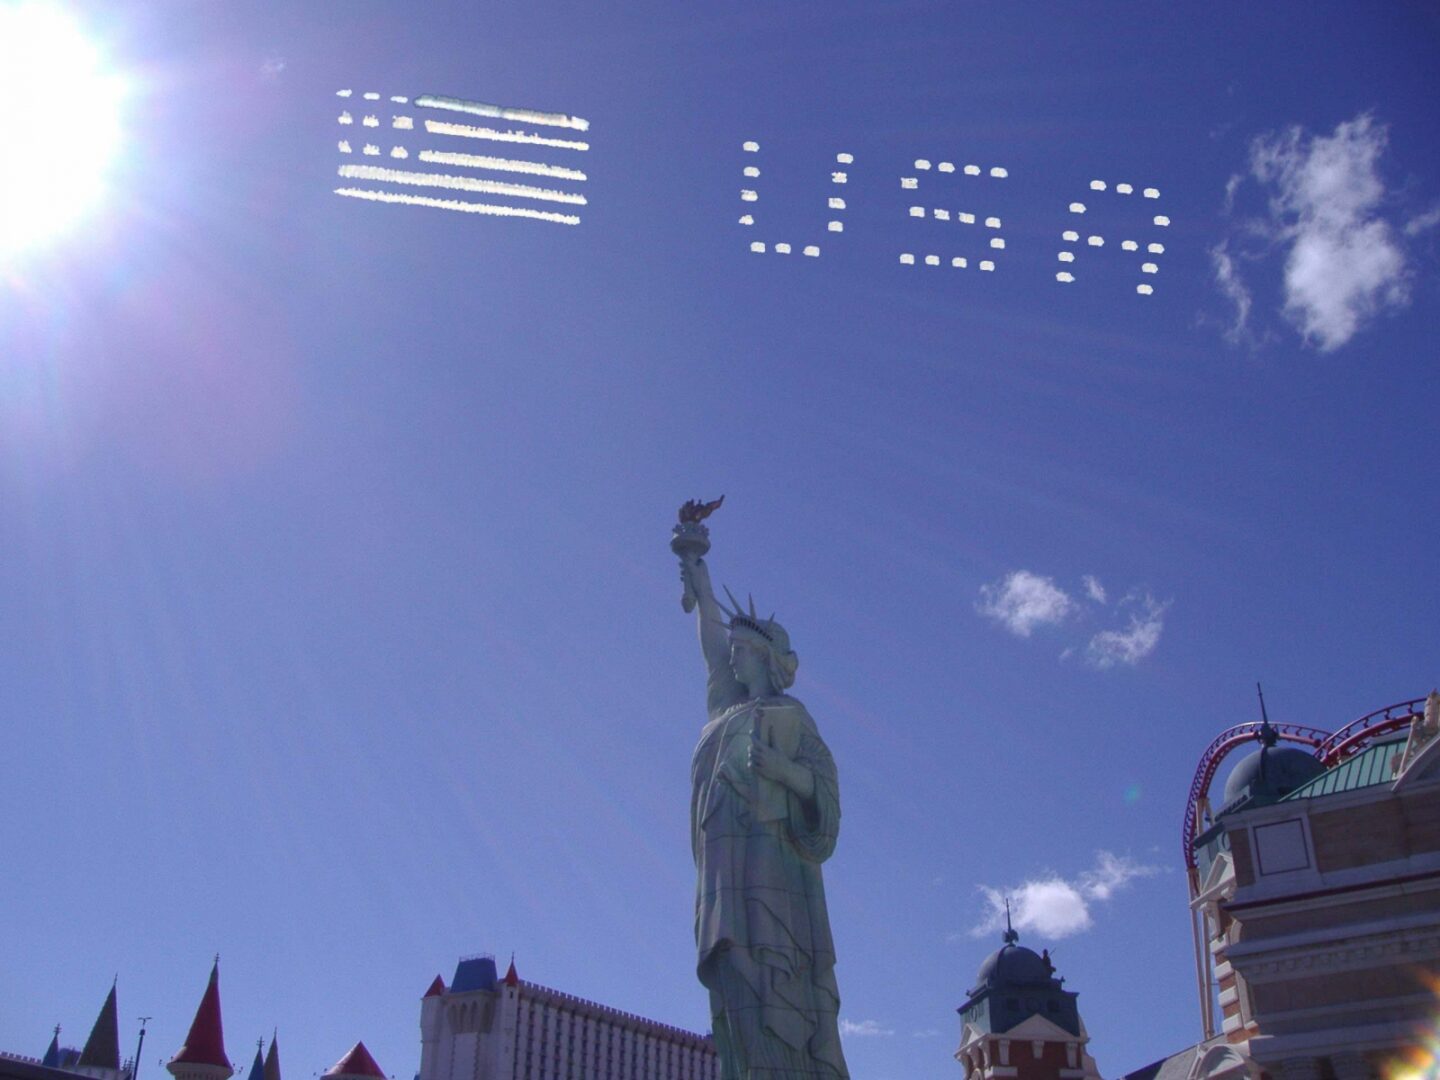 A group of planes flying in the sky with usa written on them.